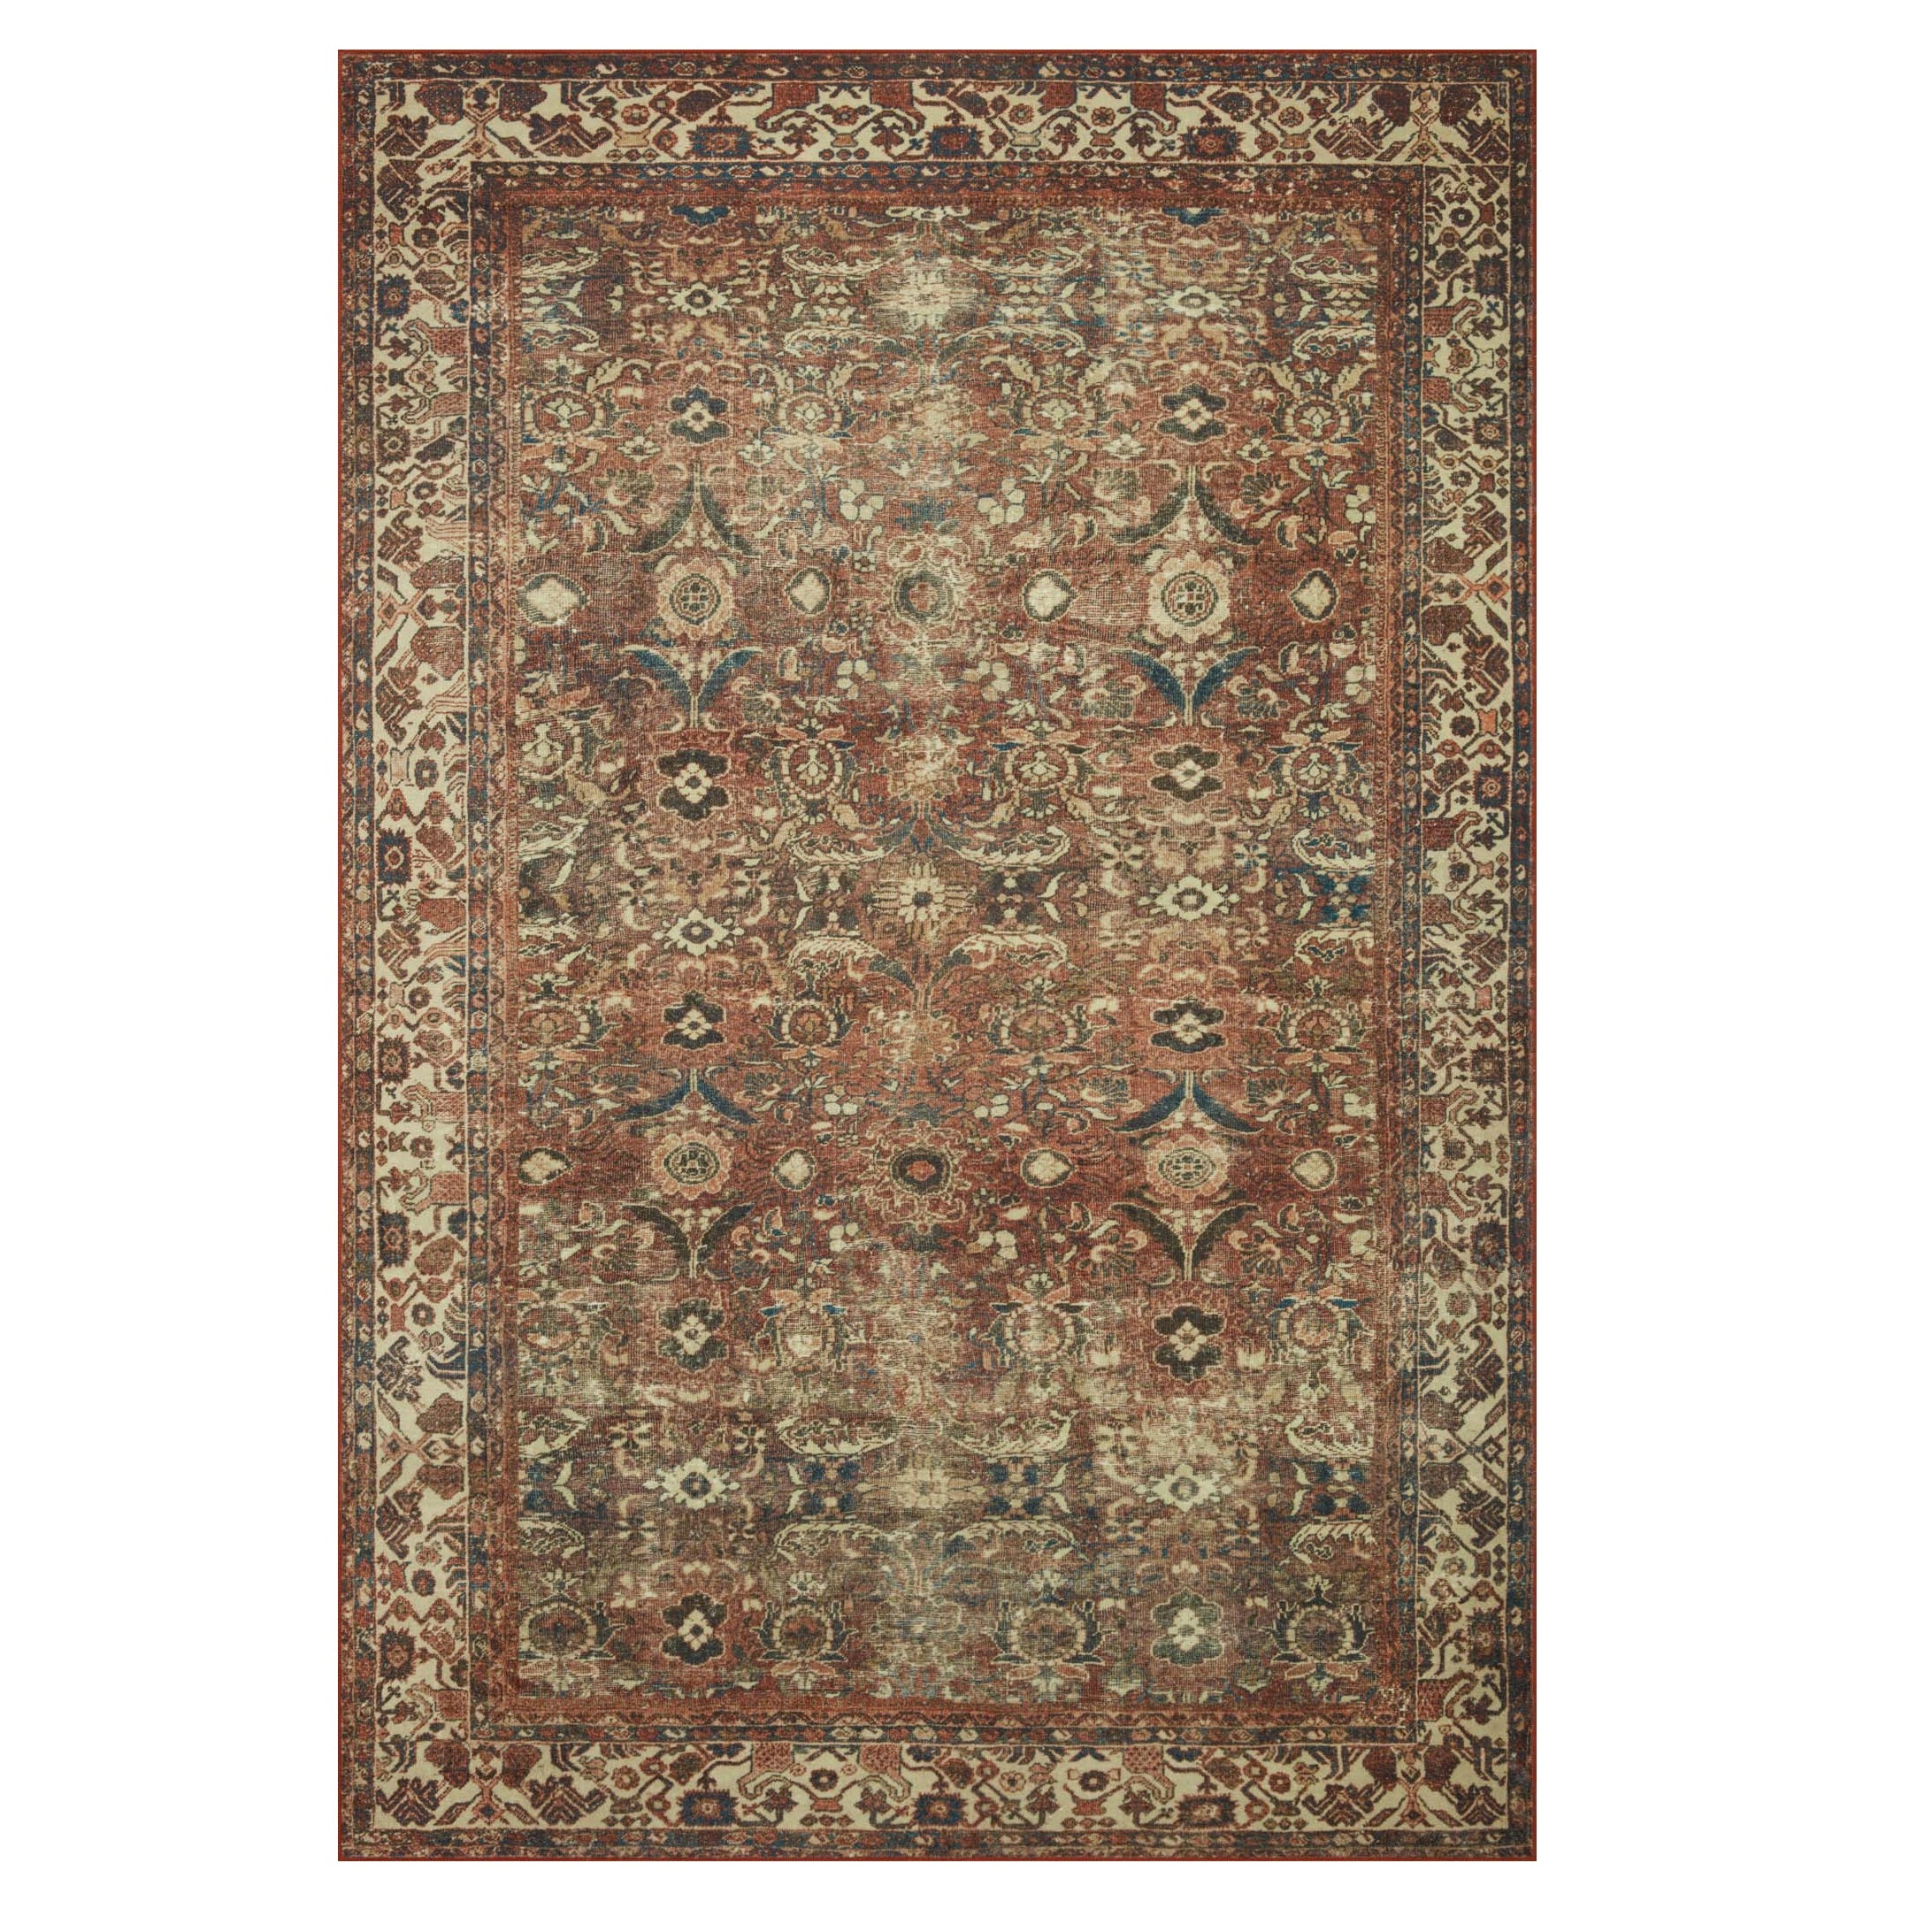 Banks Brick Ivory Rug Items range from $79.00 to $959.00